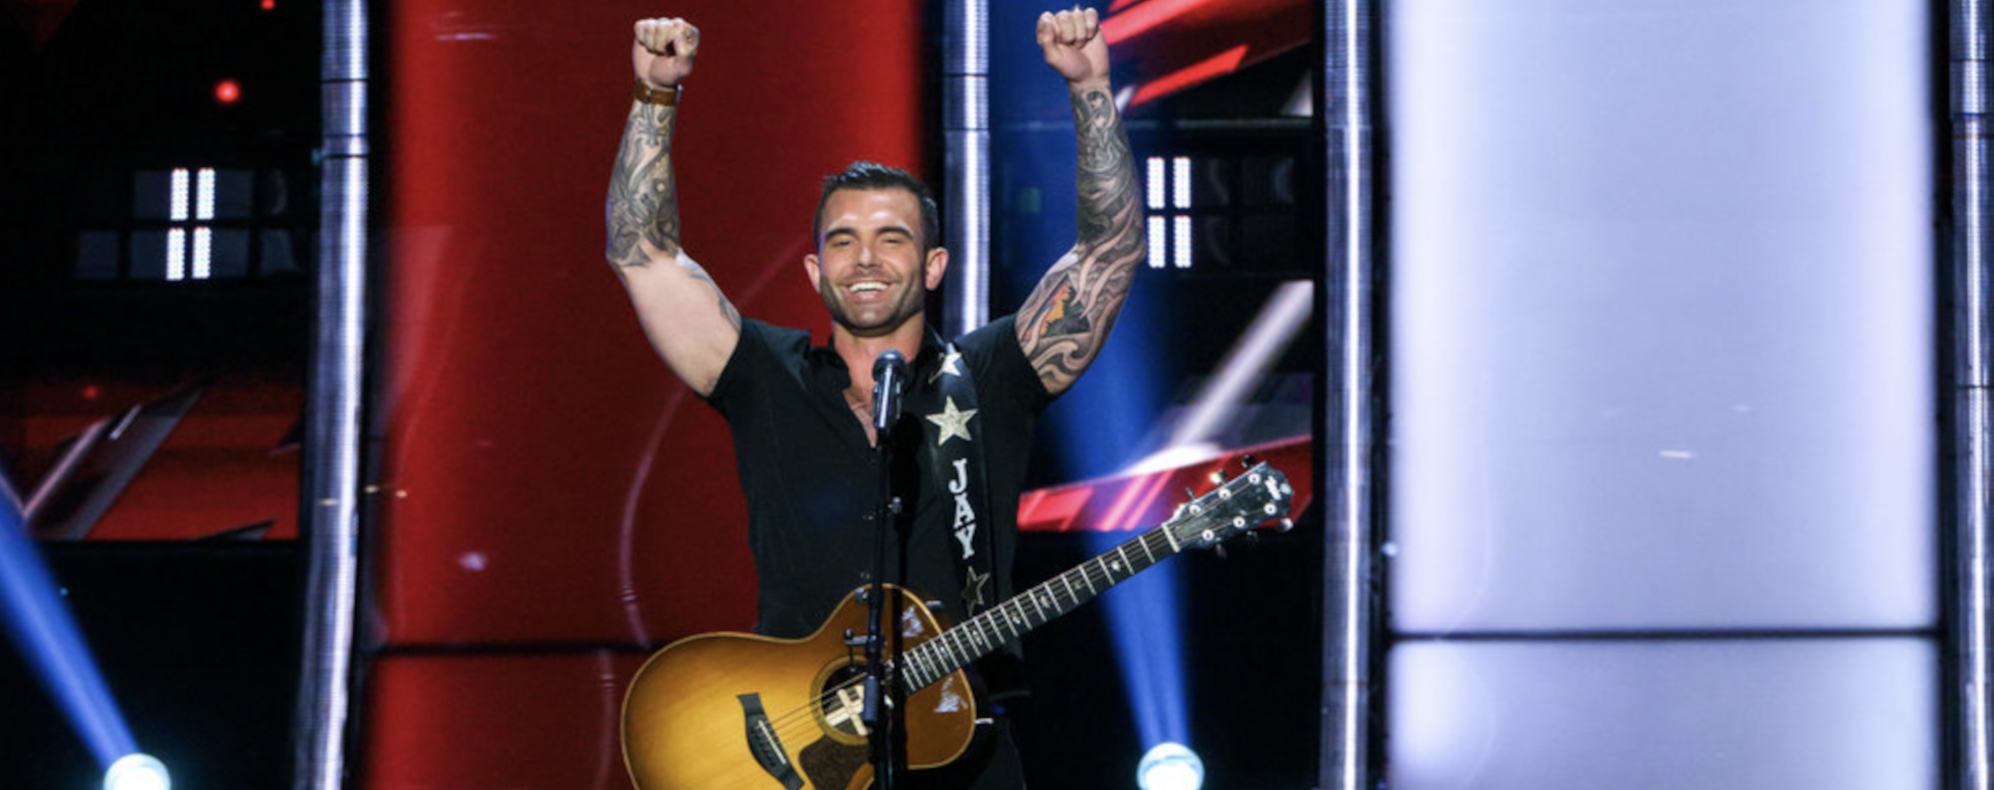 Watch: Jay Allen Honors Late Mother with Cover of Cody Johnson’s “Til You Can’t” on ‘The Voice’